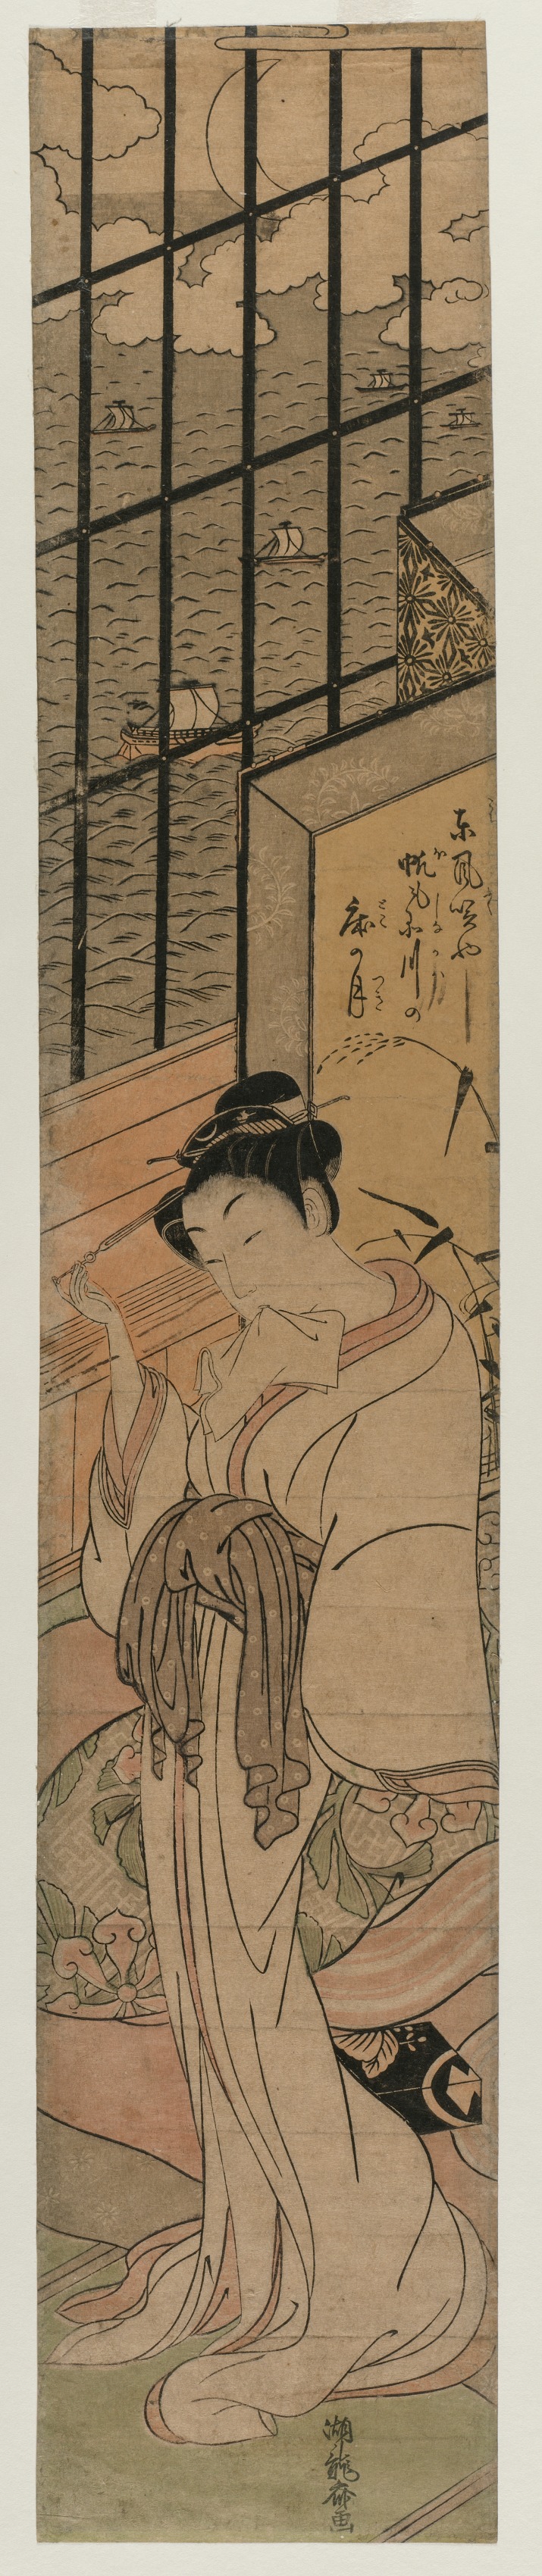 Courtesan in a Room Overlooking Edo Bay